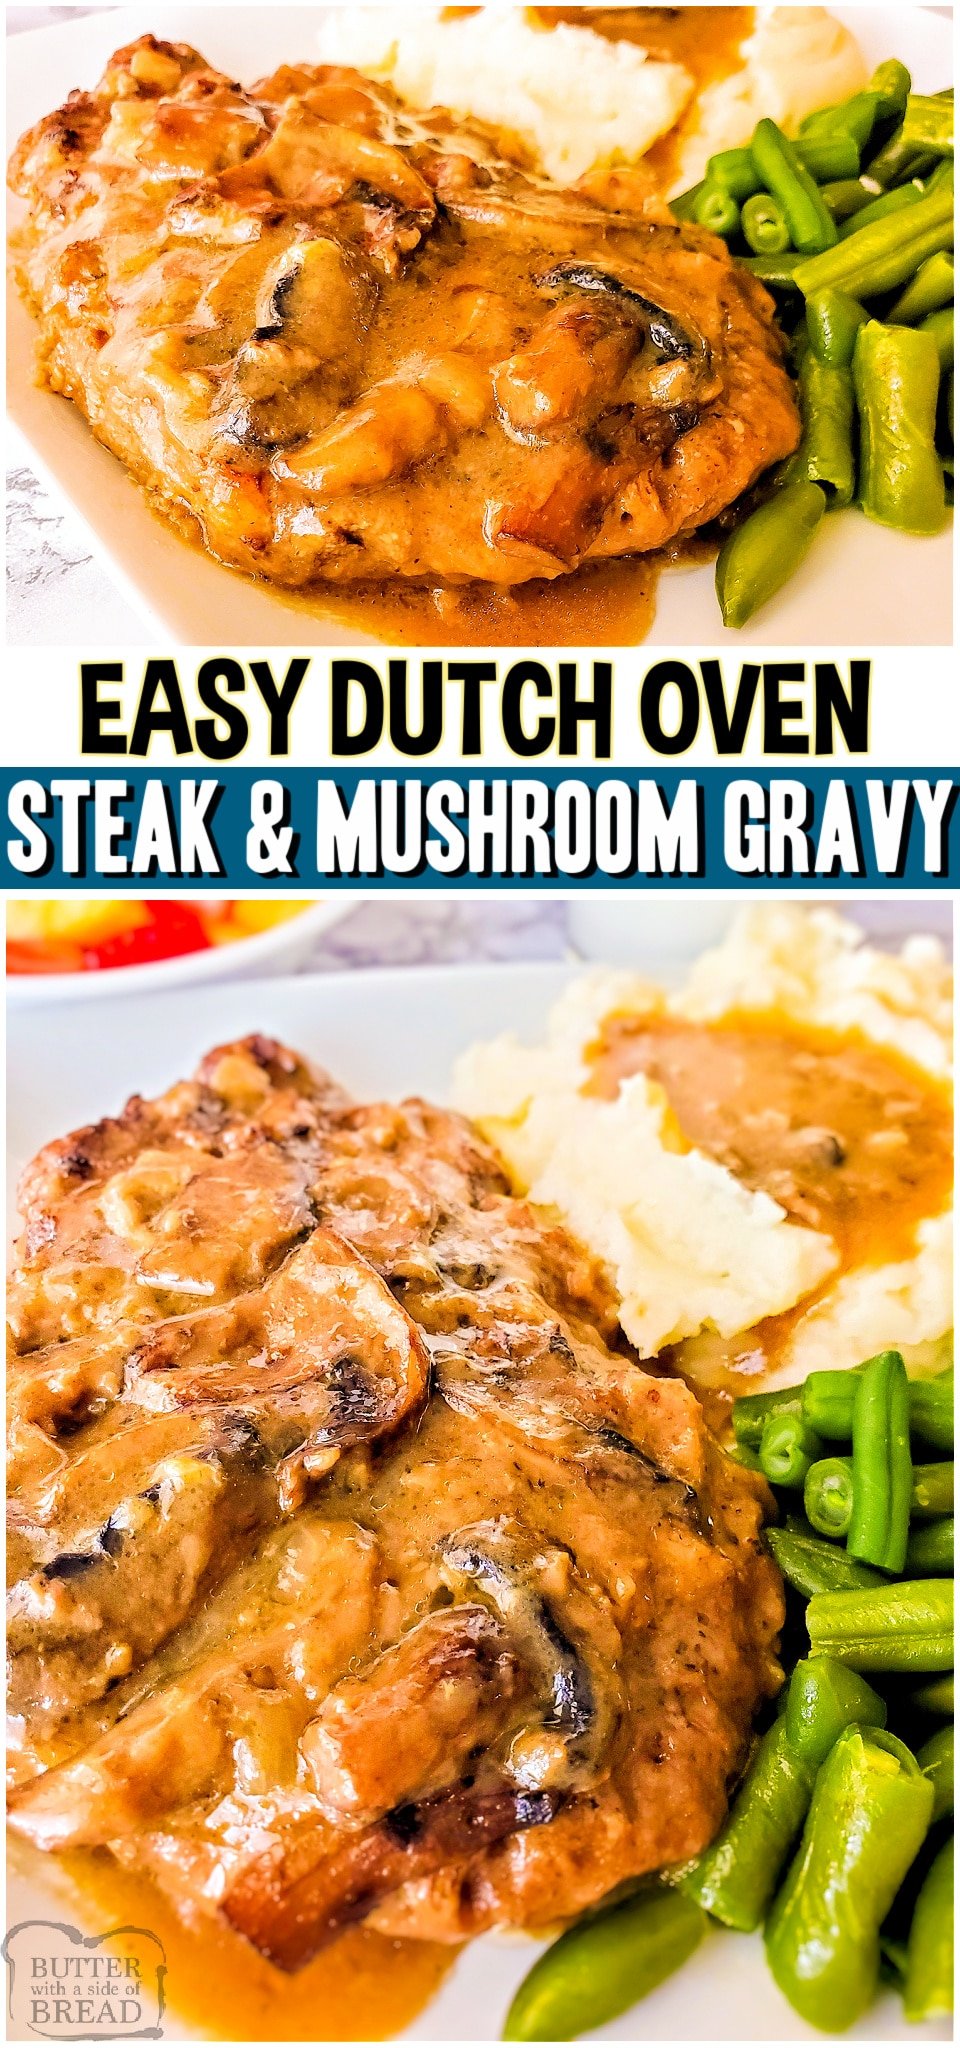 Dutch Oven Cube Steak & Gravy is a flavorful, tender cube steak recipe made with simple ingredients. Serve it up with mashed potatoes for a delicious & comforting dinner recipe. #steak #beef #dutchoven #cubesteak #gravy #dinner #easyrecipe from BUTTER WITH A SIDE OF BREAD